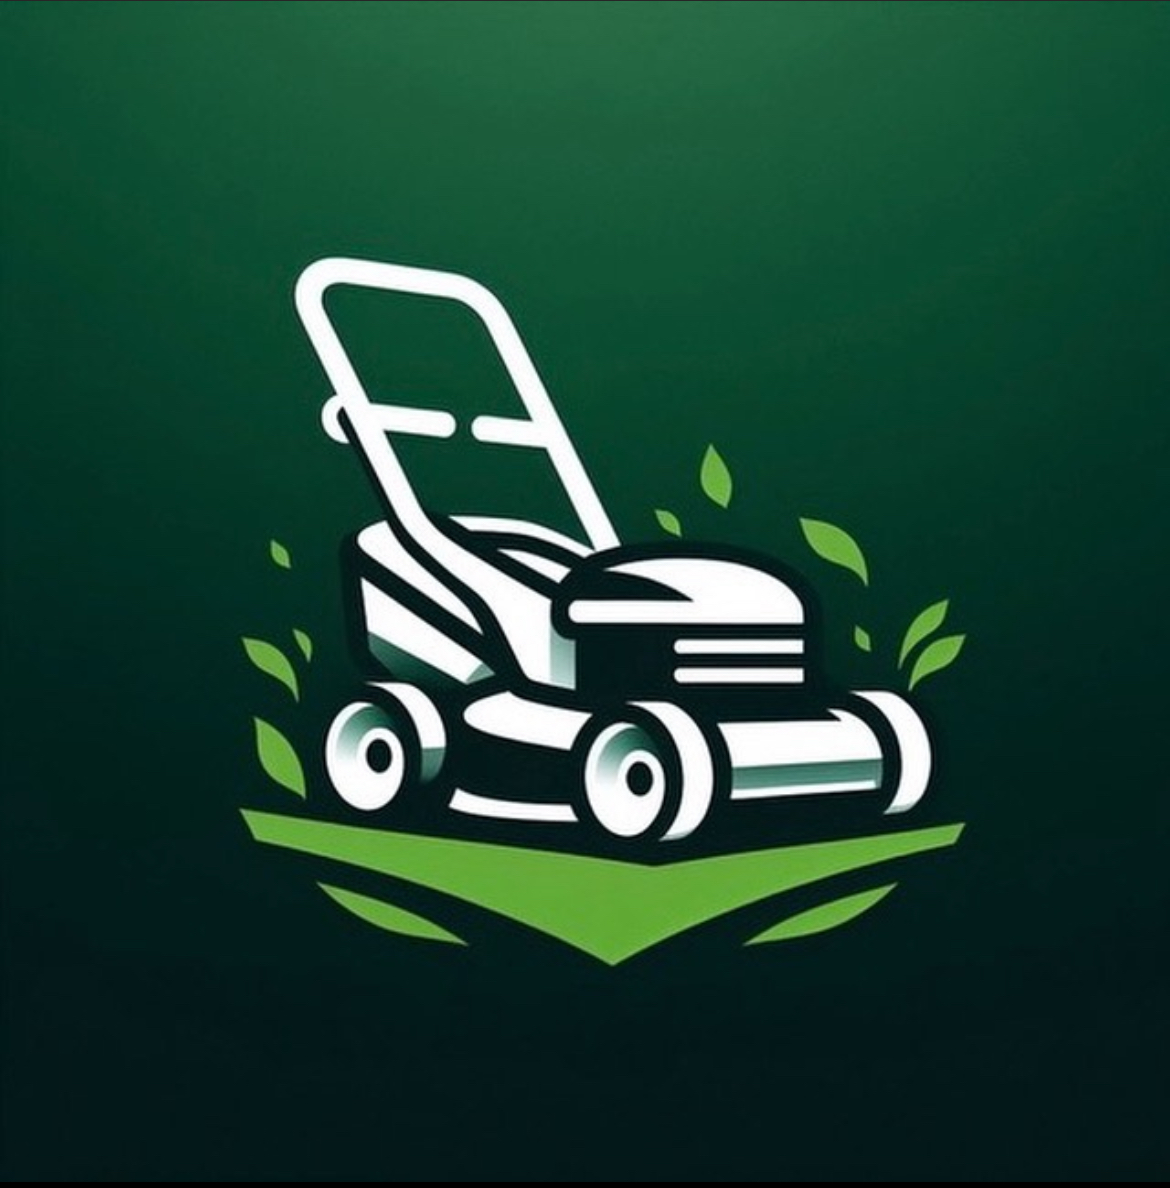 TGW+Landscaping+Business+striking+logo+encourages+customers+to+support+their+business.